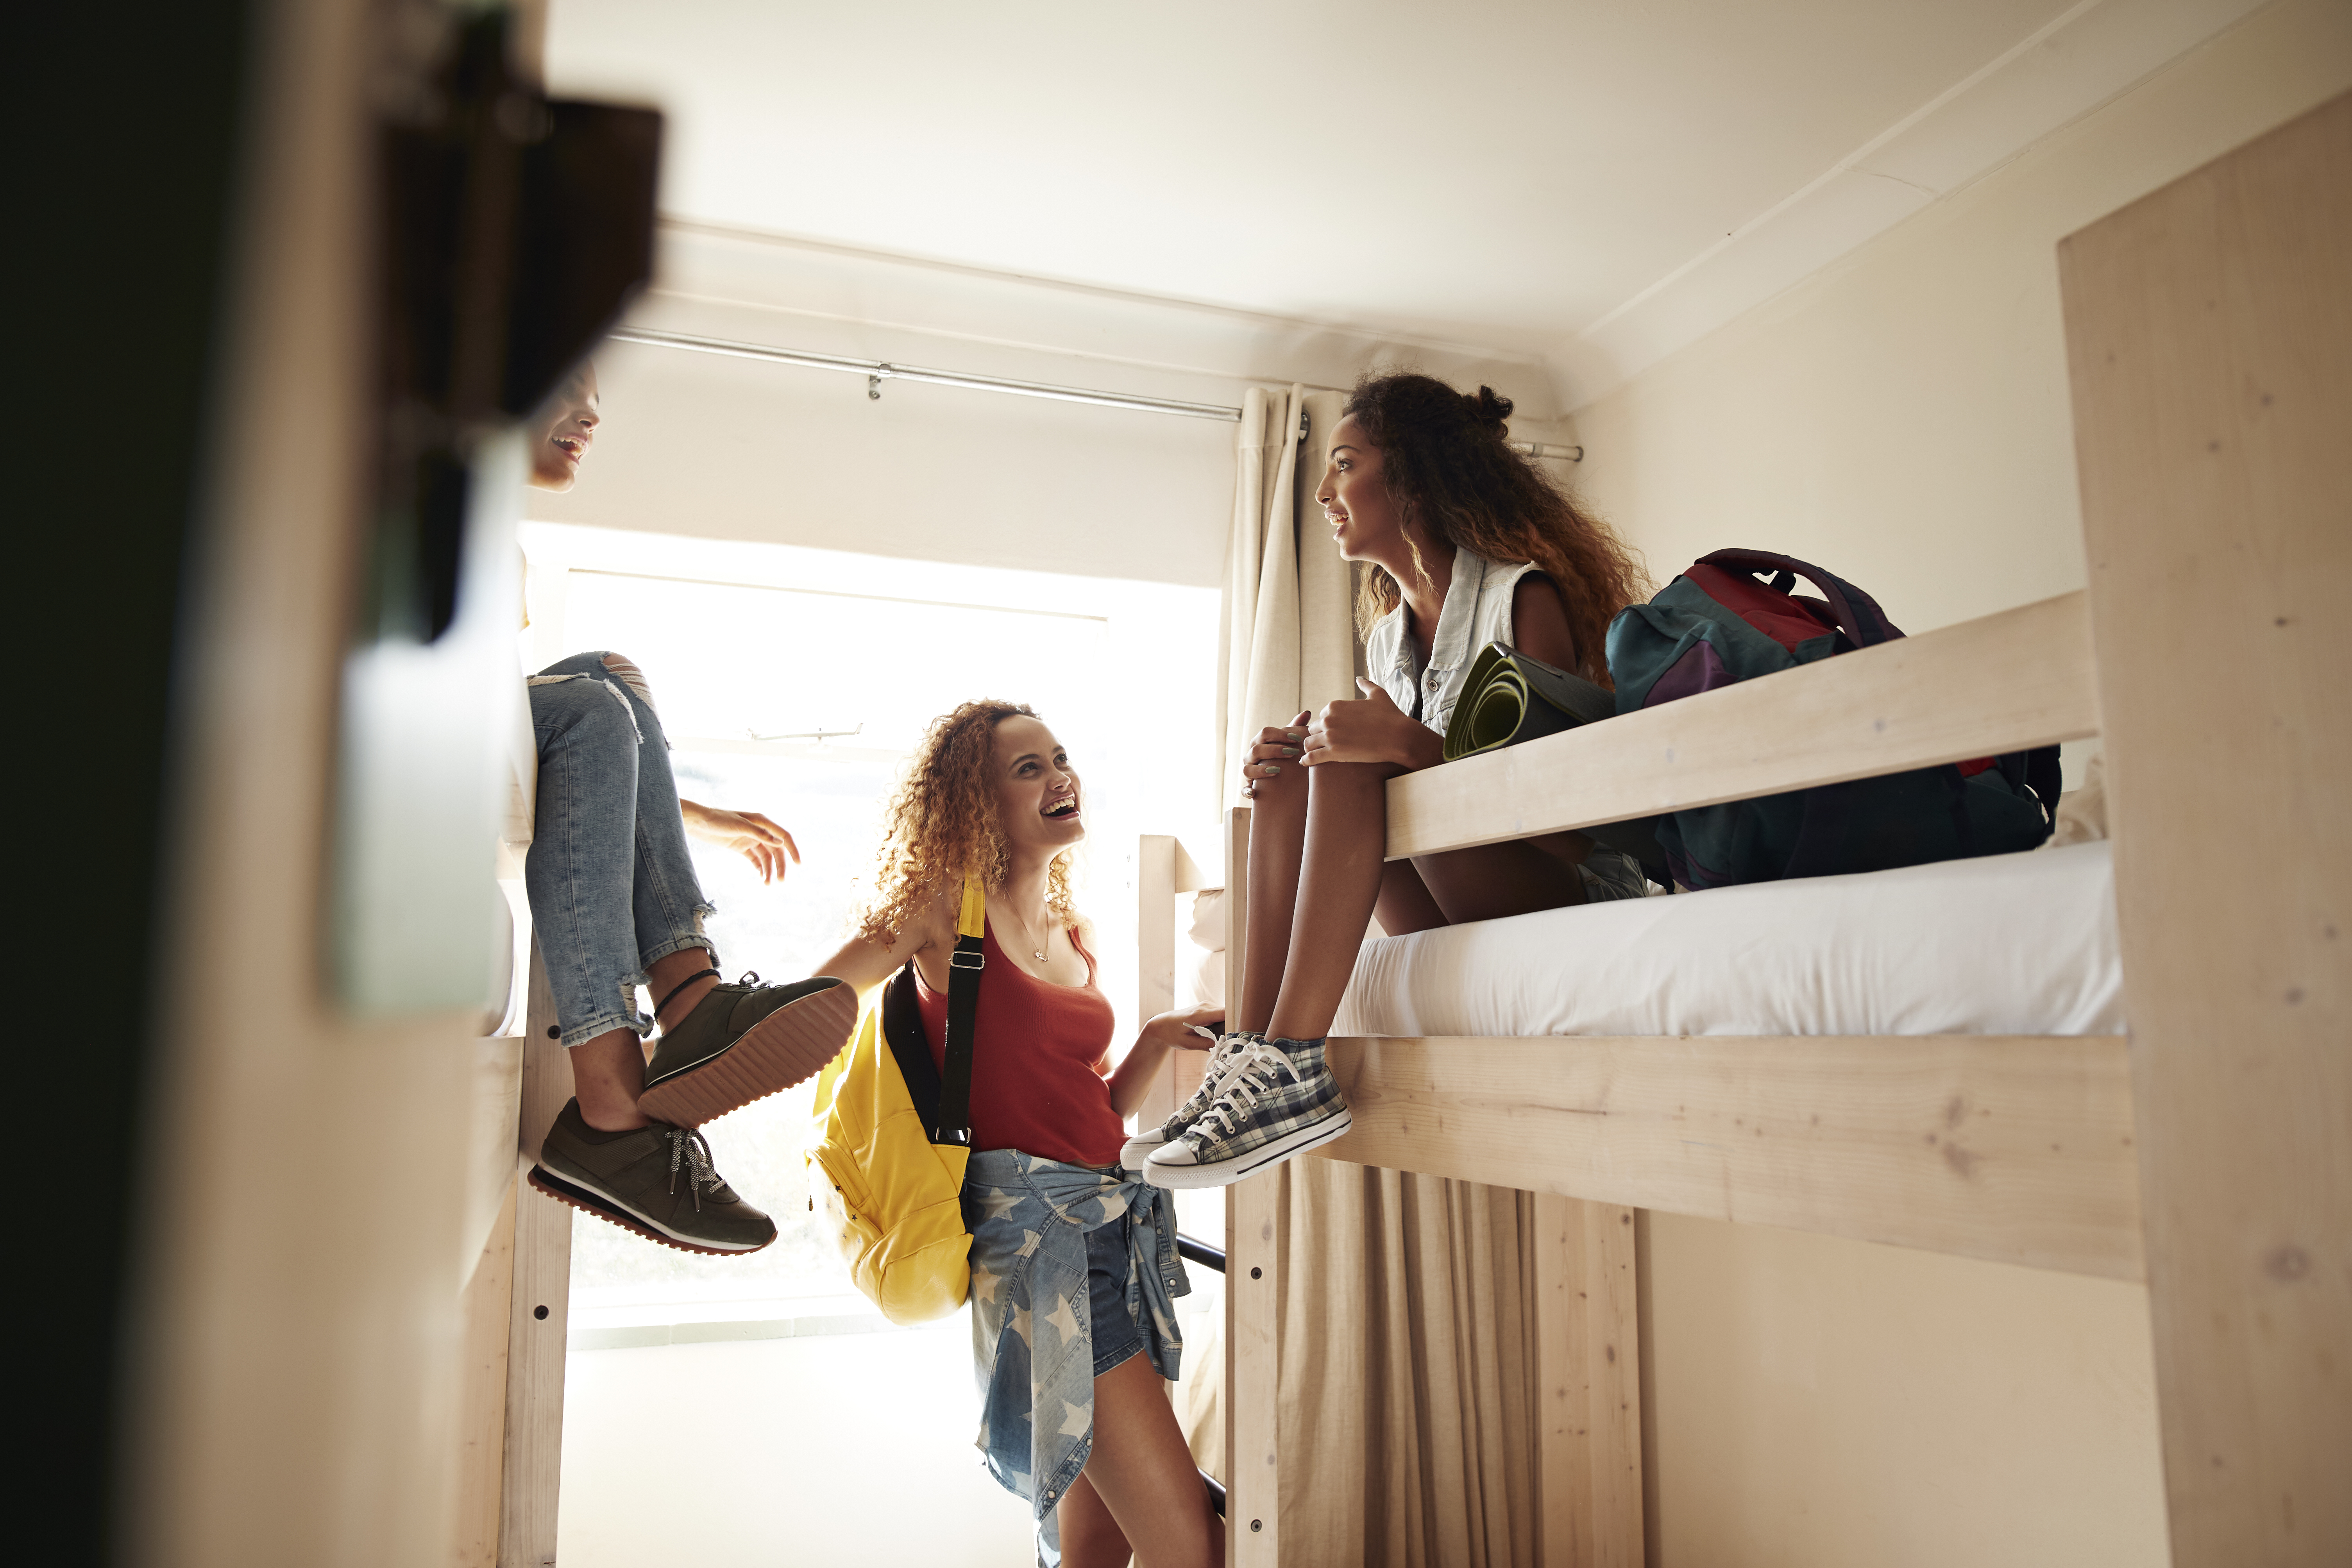 Young women sitting on bunk beds in dorm room | Source: Getty Images